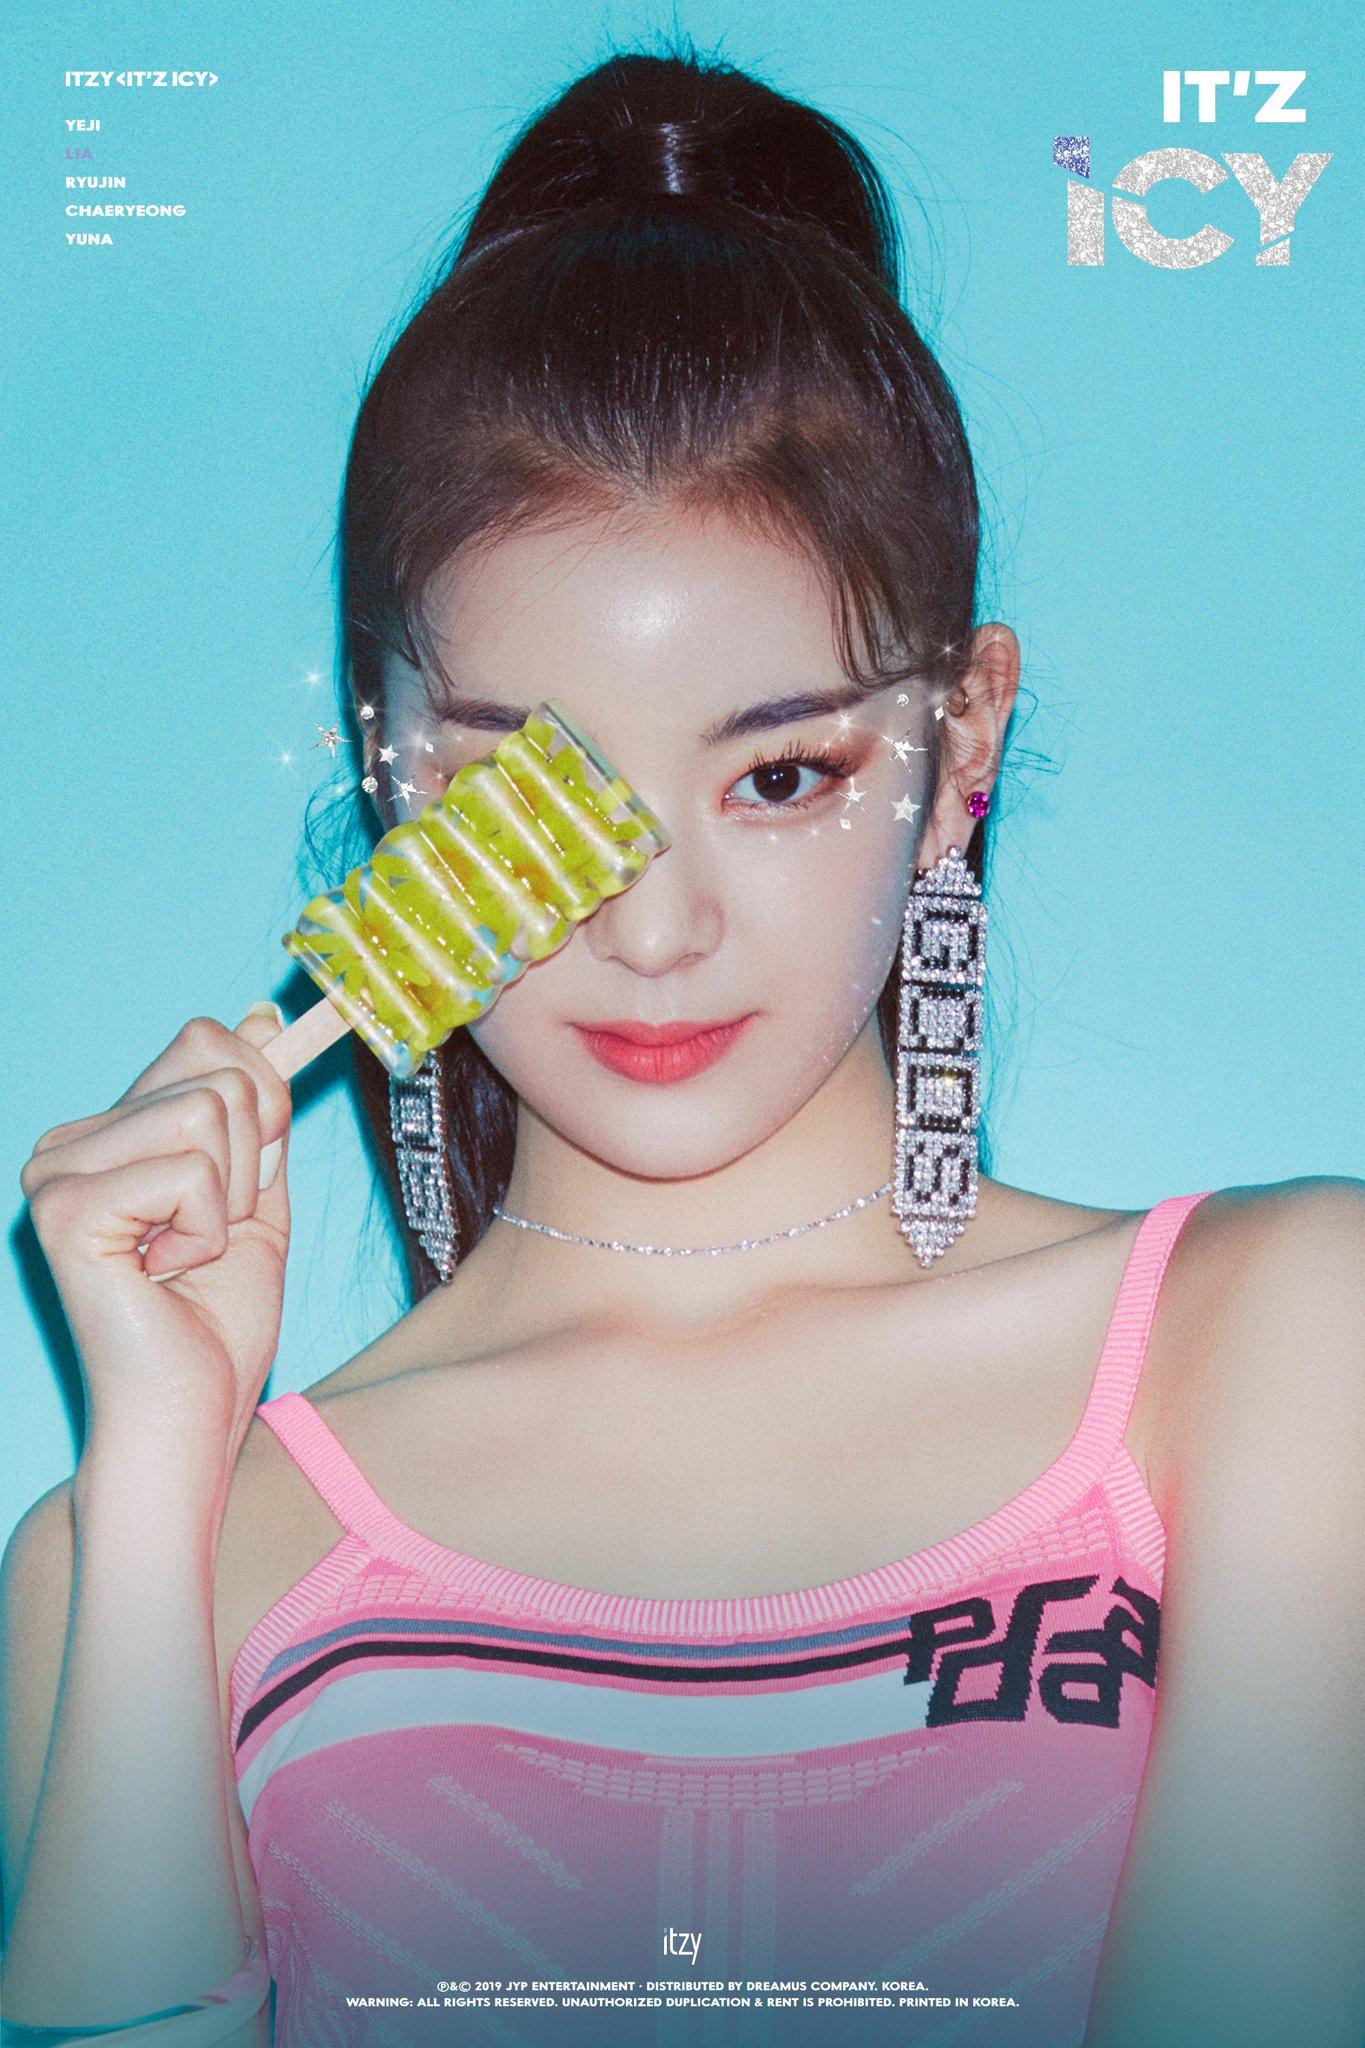 ITZY teases individual teaser image for 'IT'z ICY